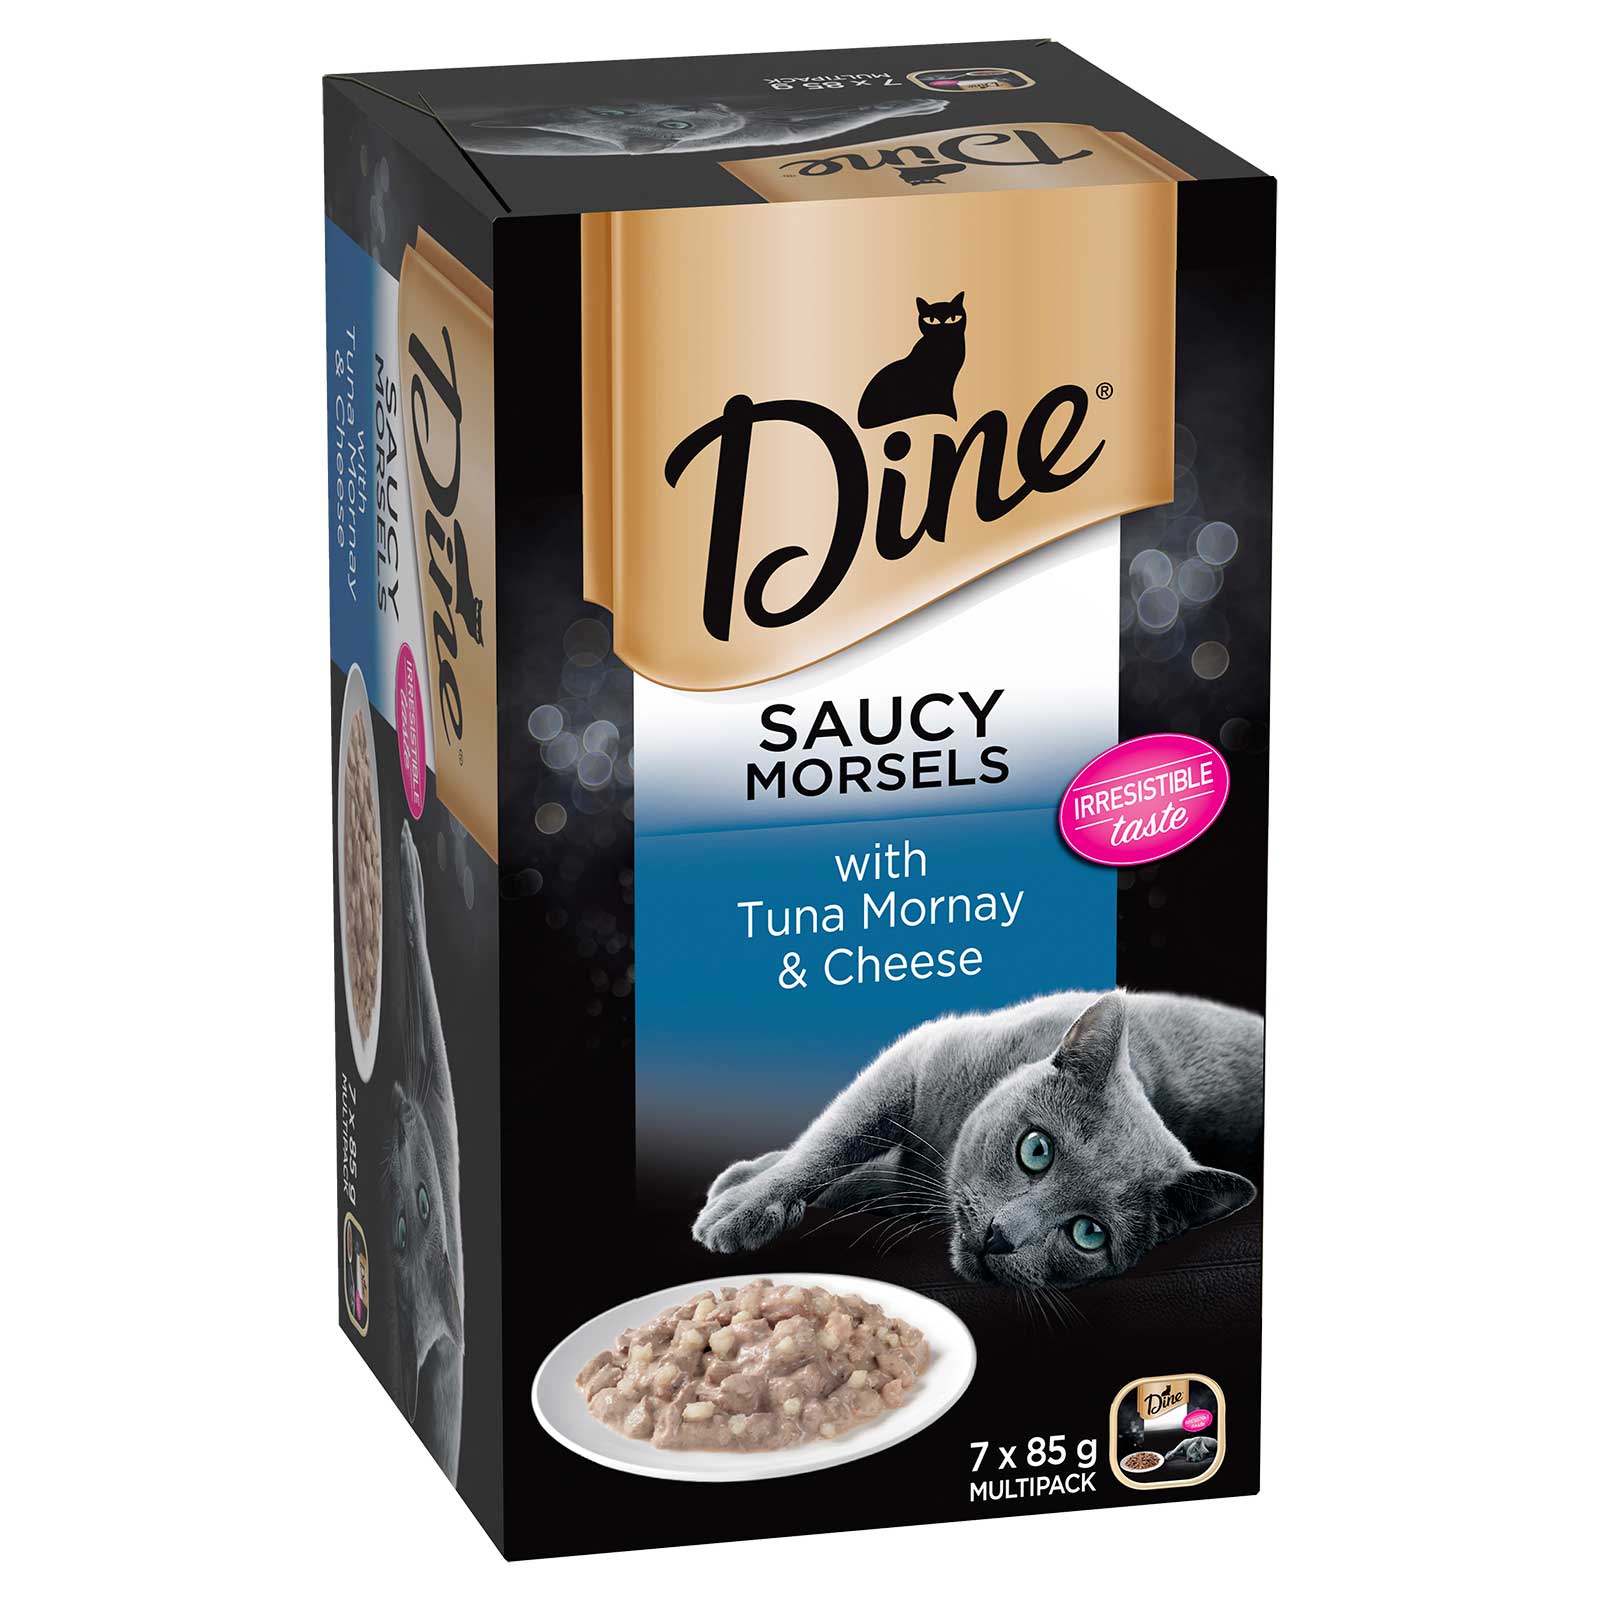 Dine Cat Food Tray Saucy Morsels with Tuna Mornay & Cheese